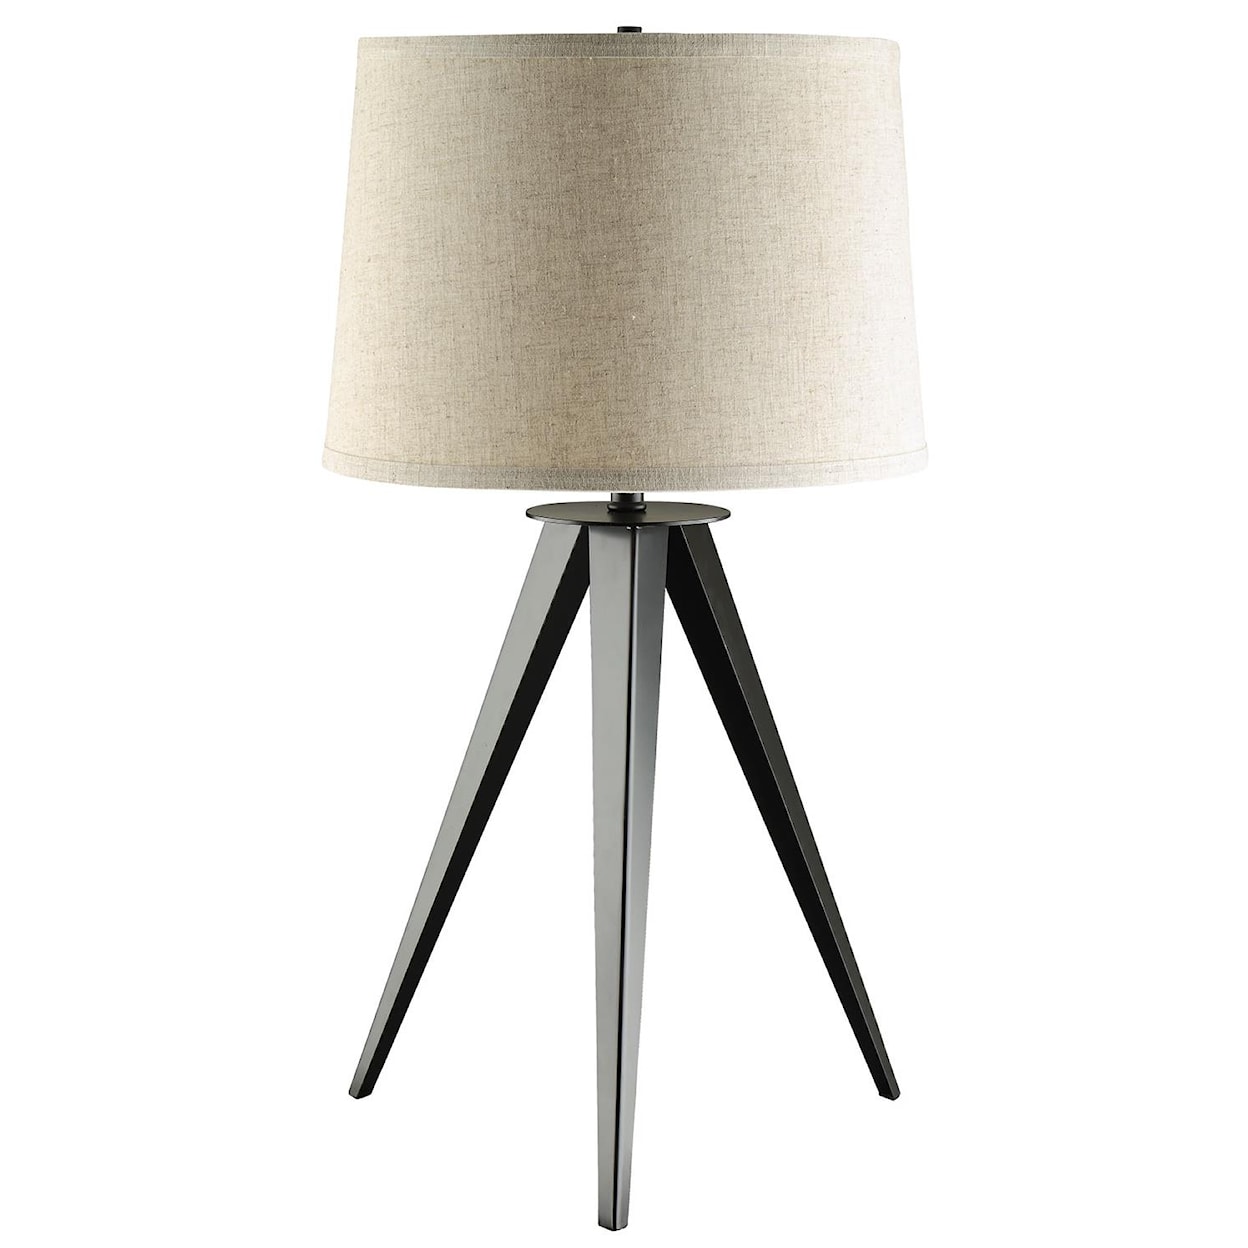 Coaster Table Lamps Lamp